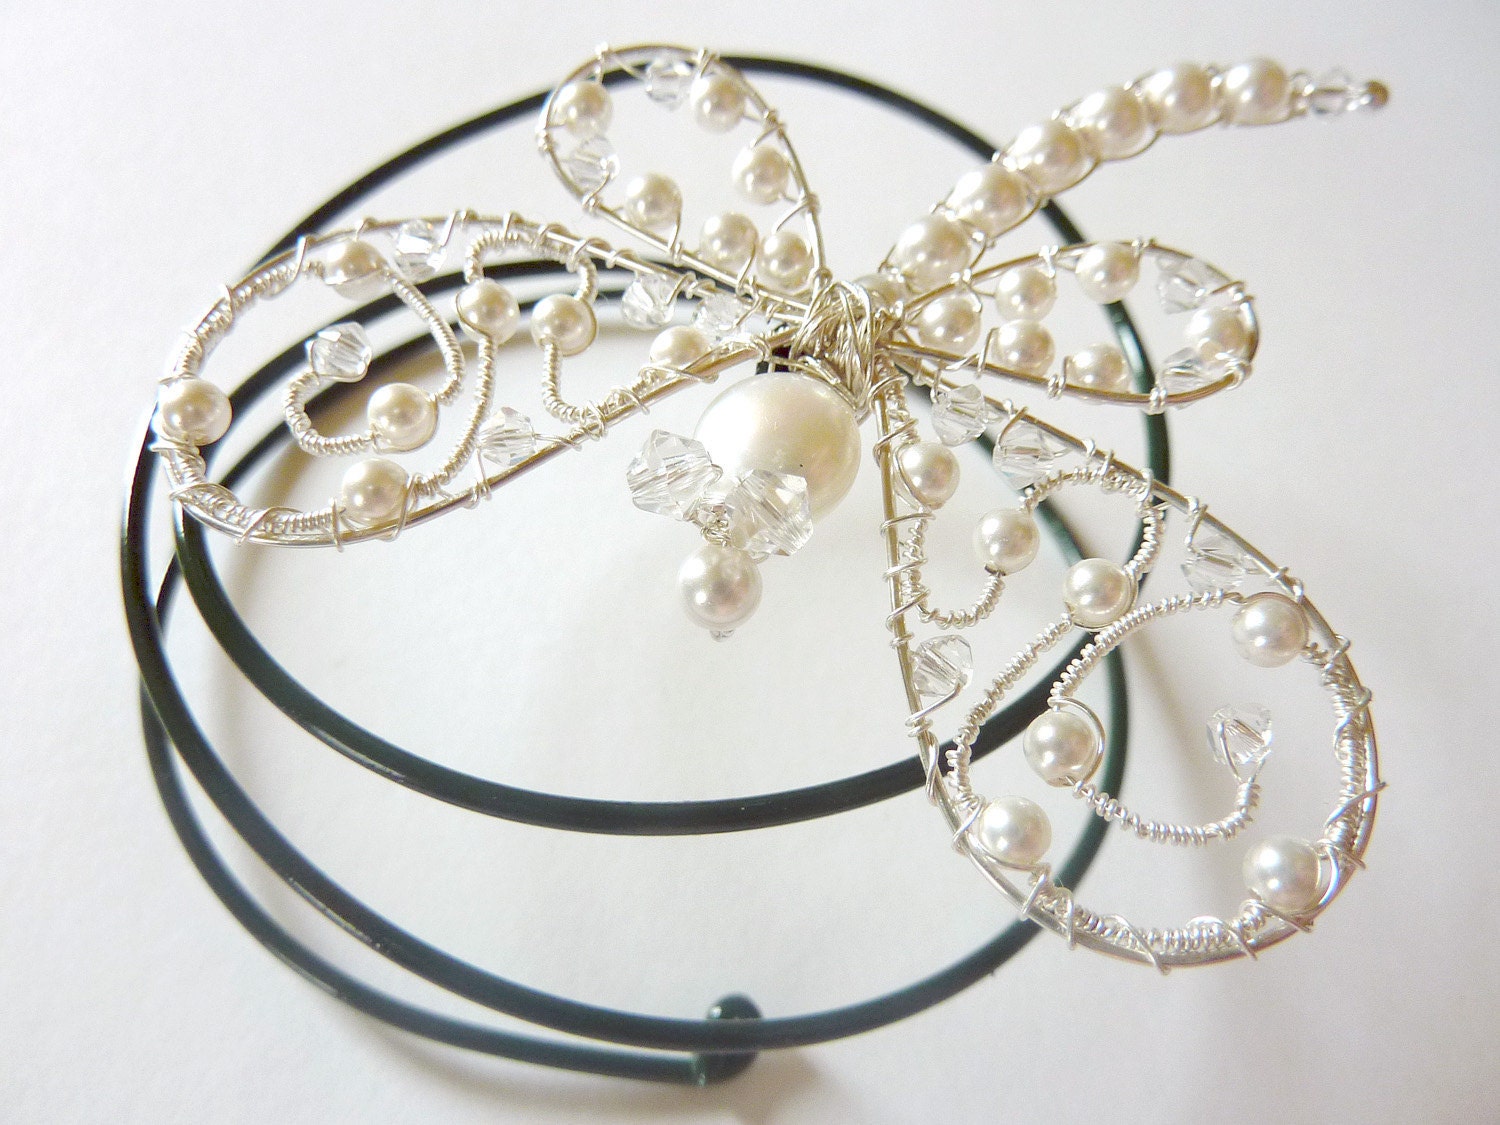 White Swarovski Pearl Ornate Dragonfly Hair Pin, Brooch or Bouquet decoration